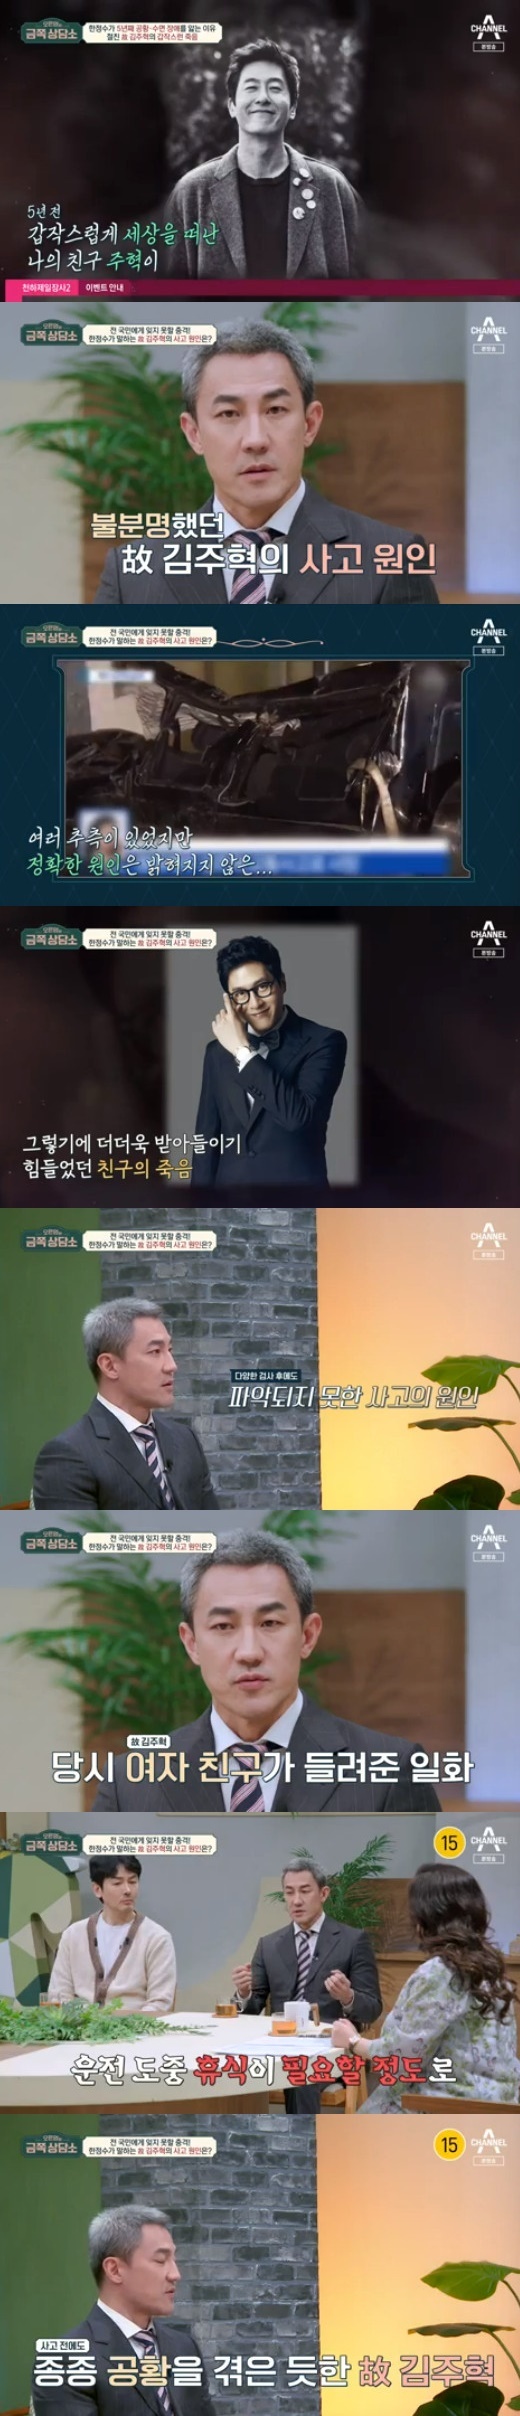 The cause of the death of actor Kim Joo-hyuk remains a mystery, and is being reexamined by the mention of his best friend Han Jung-soo.Han Jung-soo opened the pain of losing his best friend Kim Joo-hyuk in the comprehensive channel channel A Oh Eun Youngs a gold piece a counseling center broadcast on the afternoon of the 24th.I started suffering from Panic disorder and sleep disorder about four or five years ago. Why did this come to me? I wonder if Kim Joo-hyuks friend had an accident and then it happened.Kim Joo-hyuk was my best friend, and when I went there, I felt like, Its just me now. Im alone in the world. I still have this feeling. Kim Joo-hyuk suddenly died in a traffic accident in October 2017 when the Bradley Fighting Vehicle collided with another Bradley Fighting Vehicle near the front gate of an apartment building in Yeongdong-dong, Gangnam-gu, Seoul.Hes 45 years old.According to a police investigation, there were no signs of defects or mechanical malfunctions in the Bradley Fighting Vehicle, which Kim Joo-hyuk drove at the time.There was also a possibility of myocardial infarction, but the autopsy of the National Forensic Service (NFS) did not directly cause death. No alcohol or special drugs were detected. The exact circumstances of the accident that led to the death of the deceased are still unsolved.Han Jung-soo was saddened by the fact that he could not accept the death of his friend.Han Jung-soo also said that Kim Joo-hyuk seemed to have suffered Panic during his lifetime. He said, I have tried various tests and have not found any obvious cause.At that time, I heard from a girlfriend that Kim Joo-hyuk sometimes drove and suddenly it was too hard. He stopped the car in the middle and took a rest for 20 ~ 30 minutes and then drove again. 